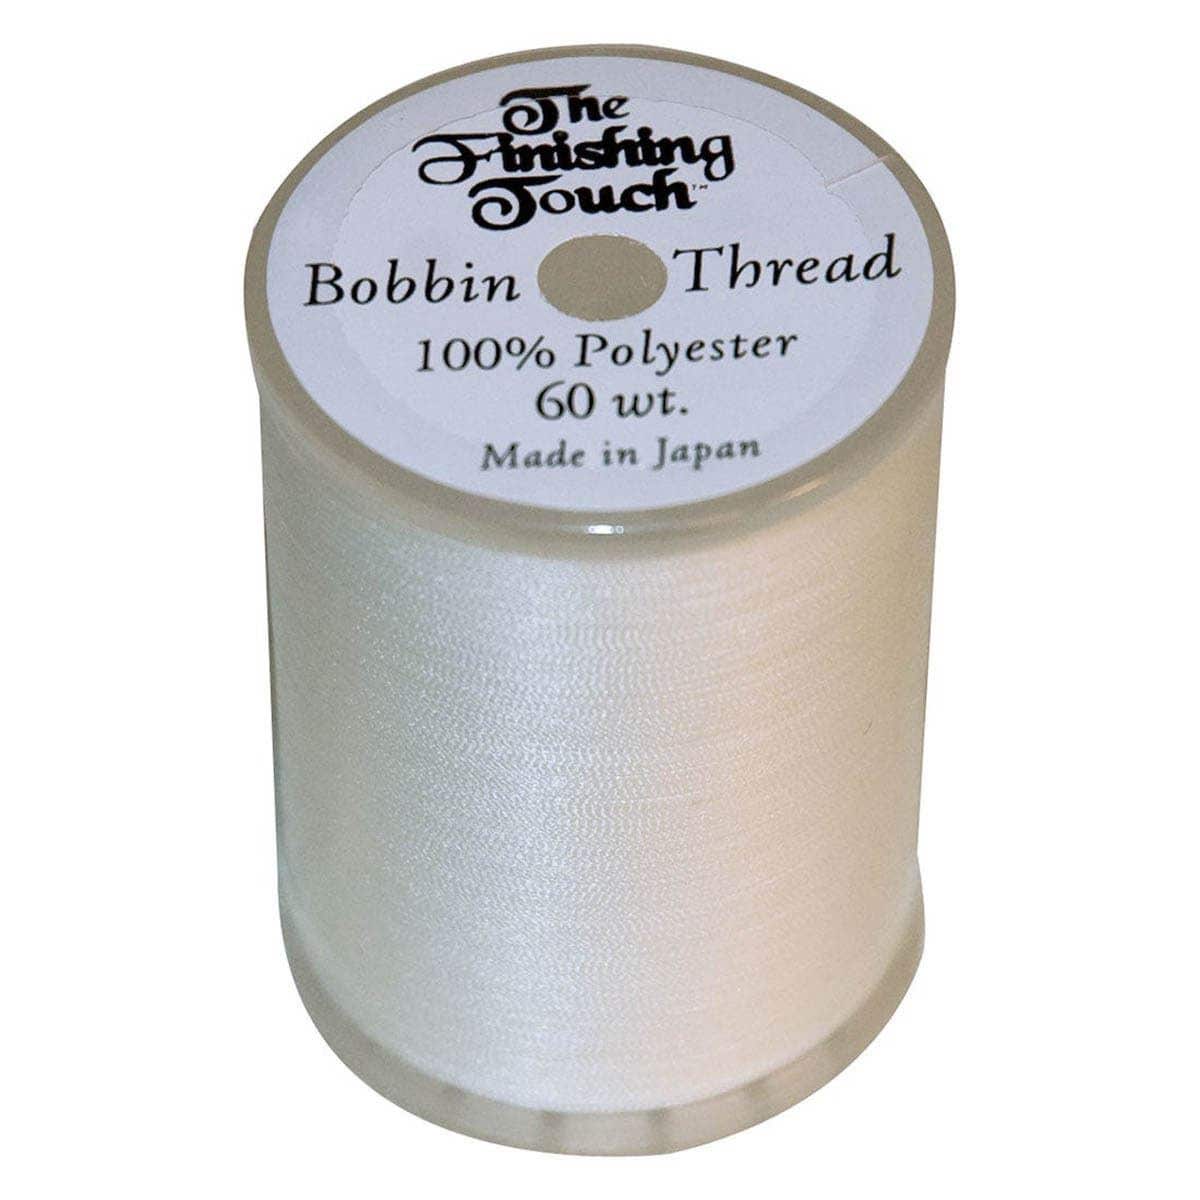 ThreadNanny 2 X-Large Cones Embroidery Bobbin Thread - 60wt for Machine Embroidery and Sewing Machines Lintfree - 5500 Yards Each